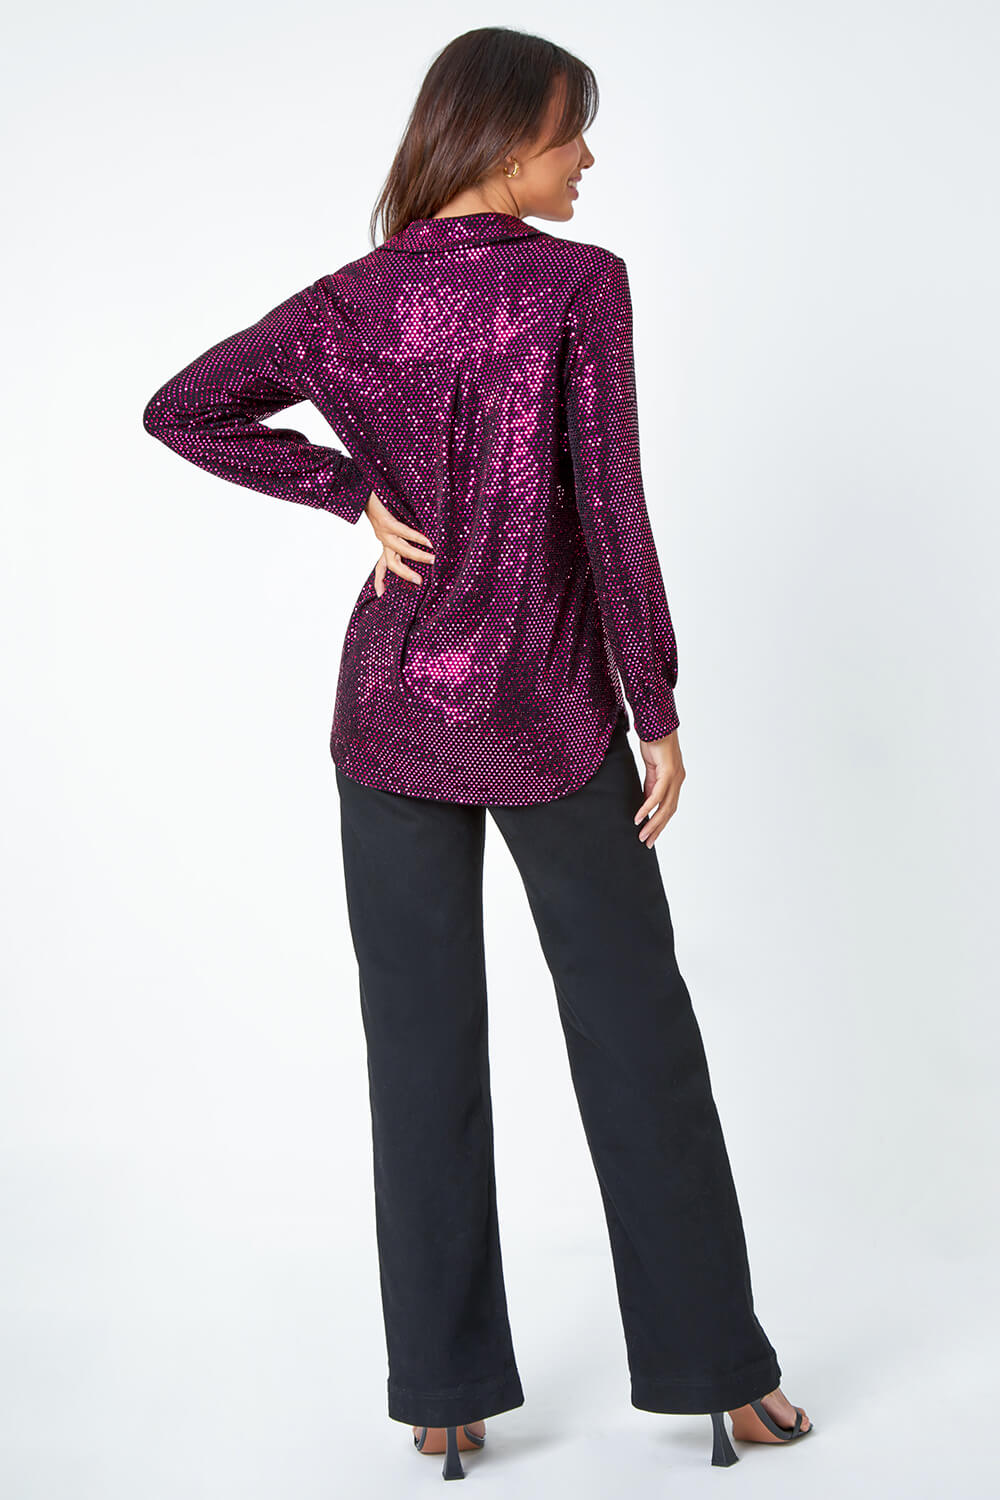 CERISE Sequin Stretch Shirt Top, Image 3 of 5